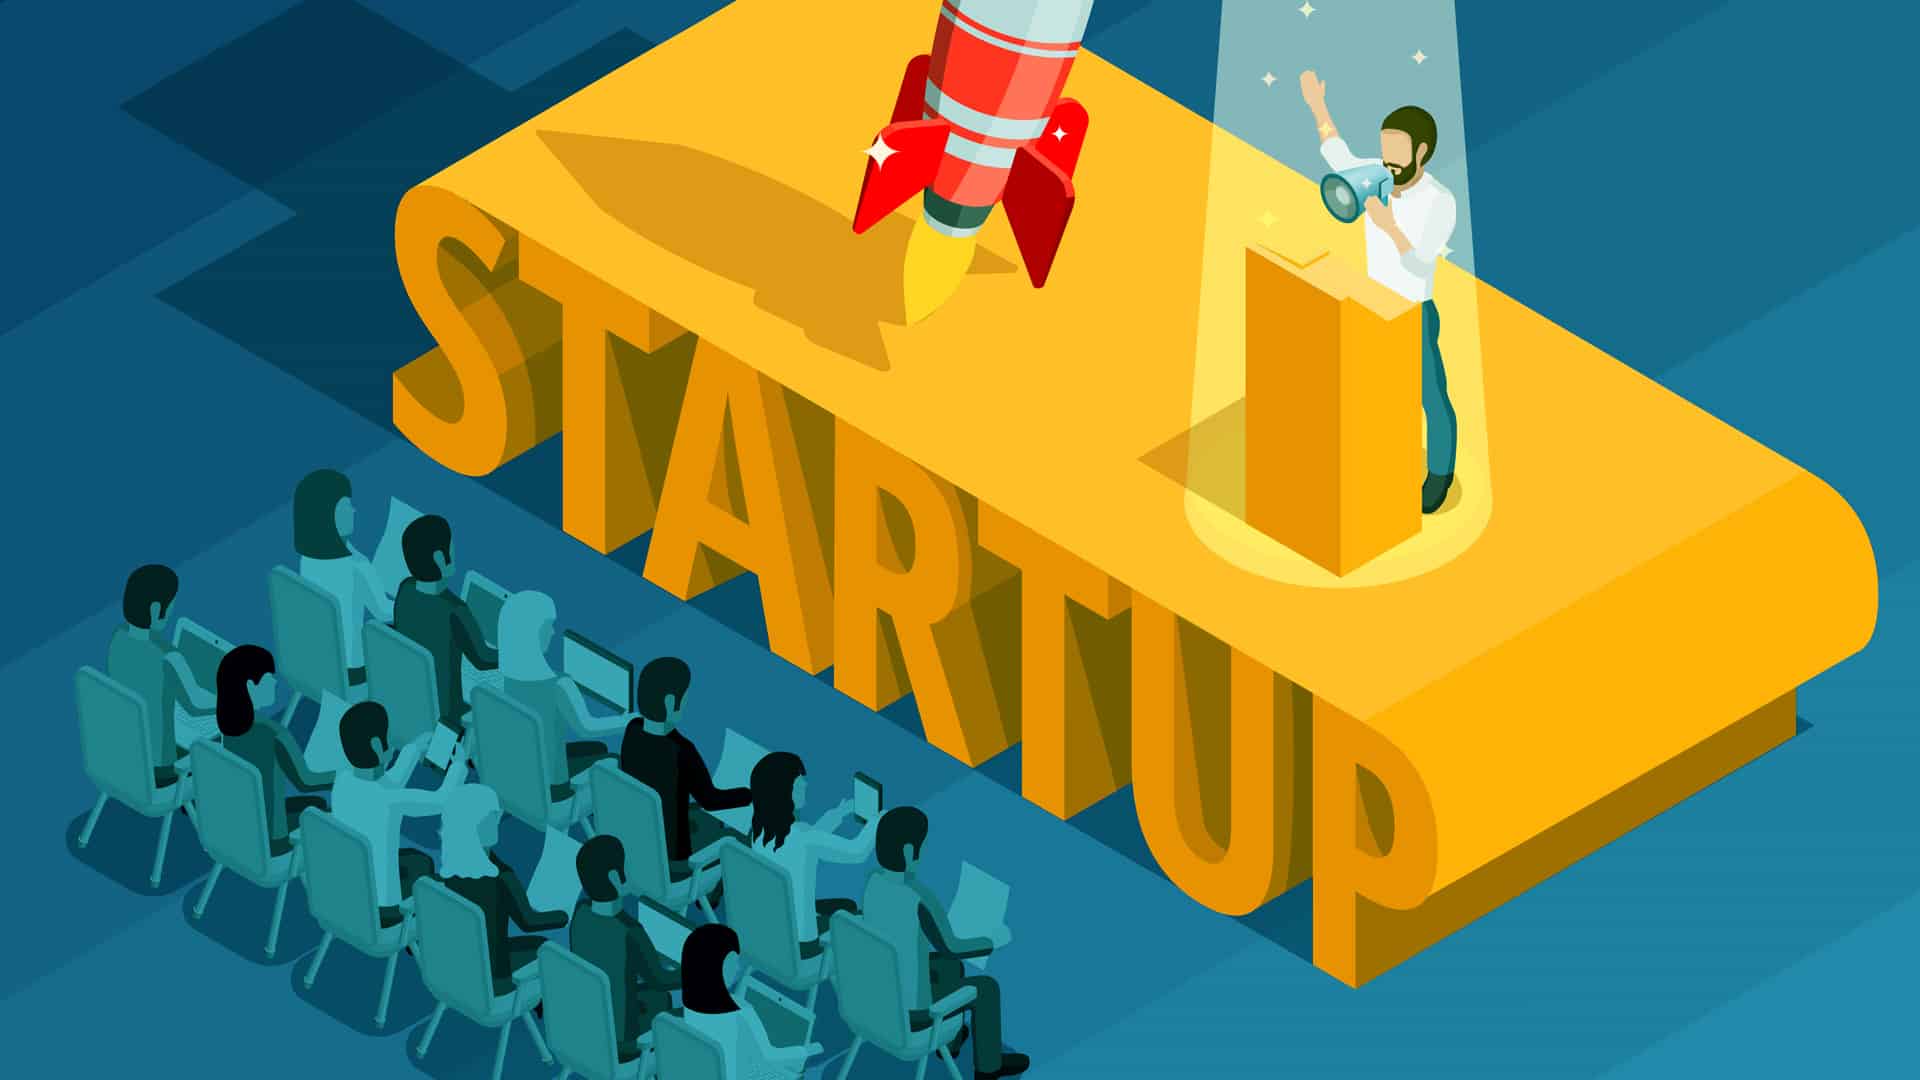 IT ministry to promote 10,000 startups in next 5-6 years: Secretary A K Sharma